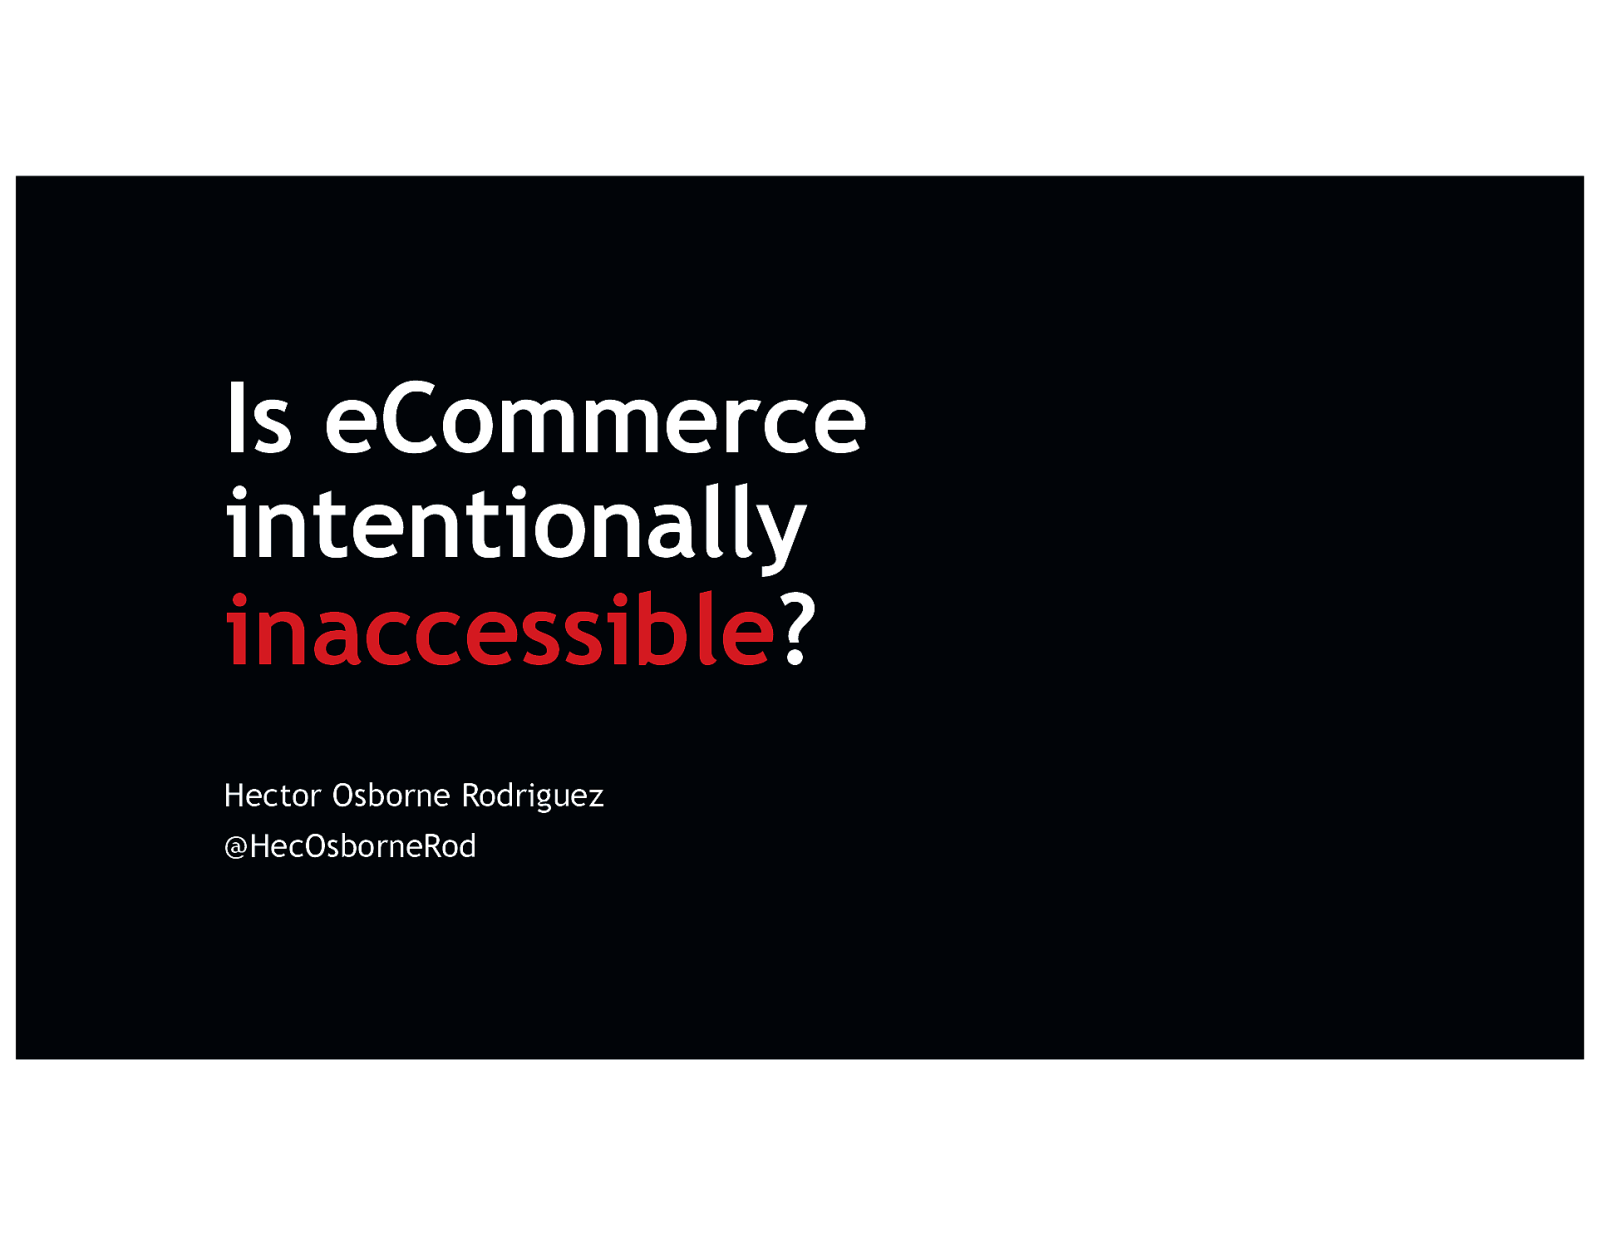 Is eCommerce intentionally inaccessible?